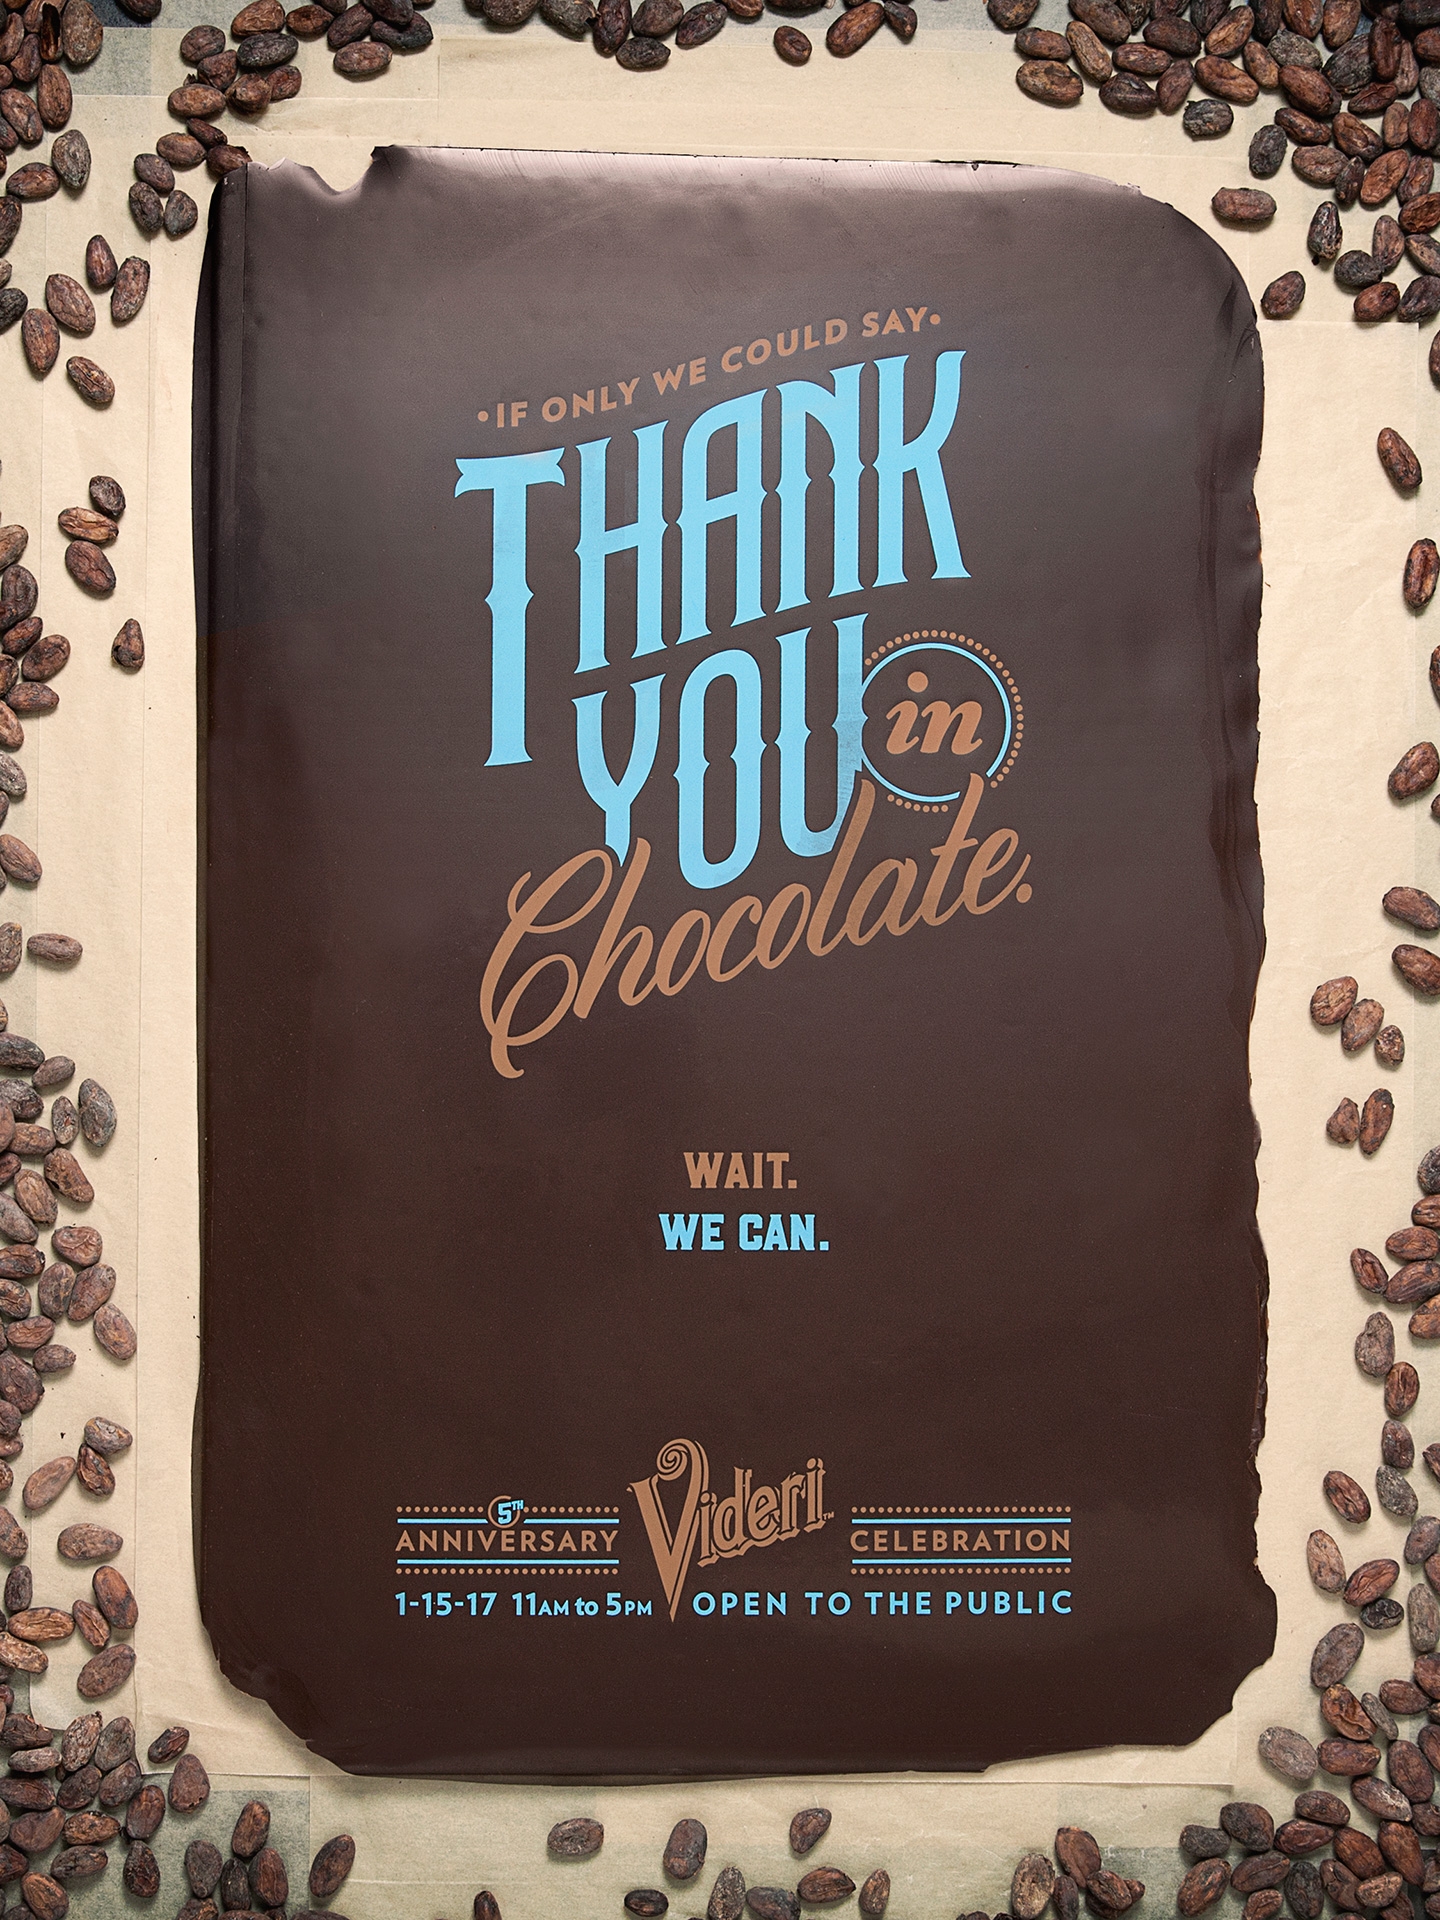 American Chocolate Company Celebrates Birthday With Edible Posters - B&T